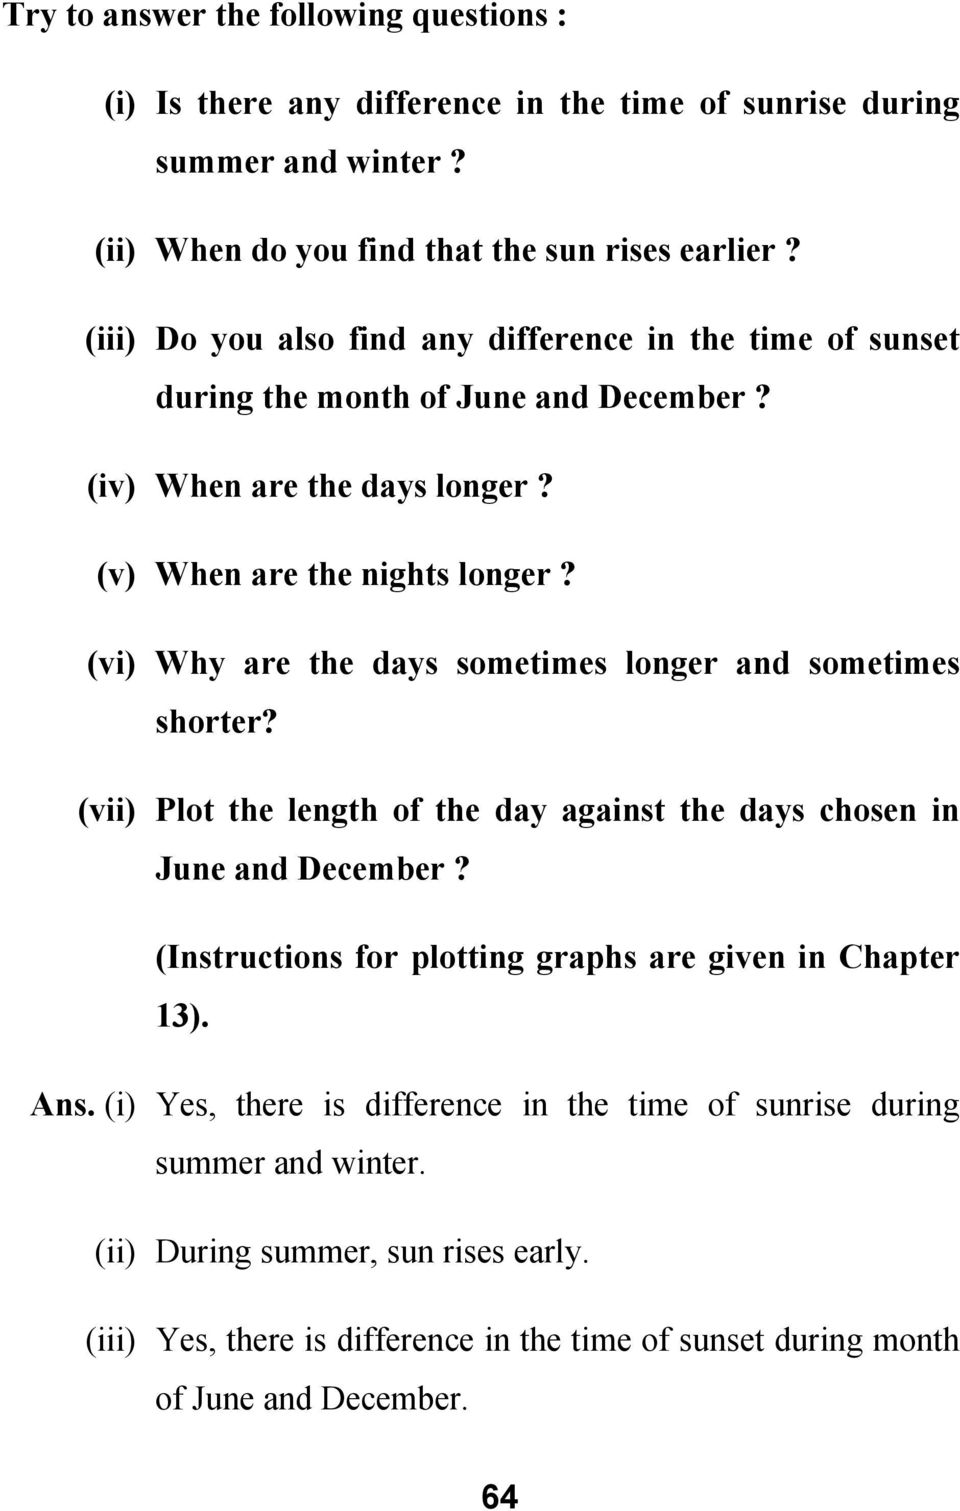 (vi) Why are the days sometimes longer and sometimes shorter? (vii) Plot the length of the day against the days chosen in June and December?